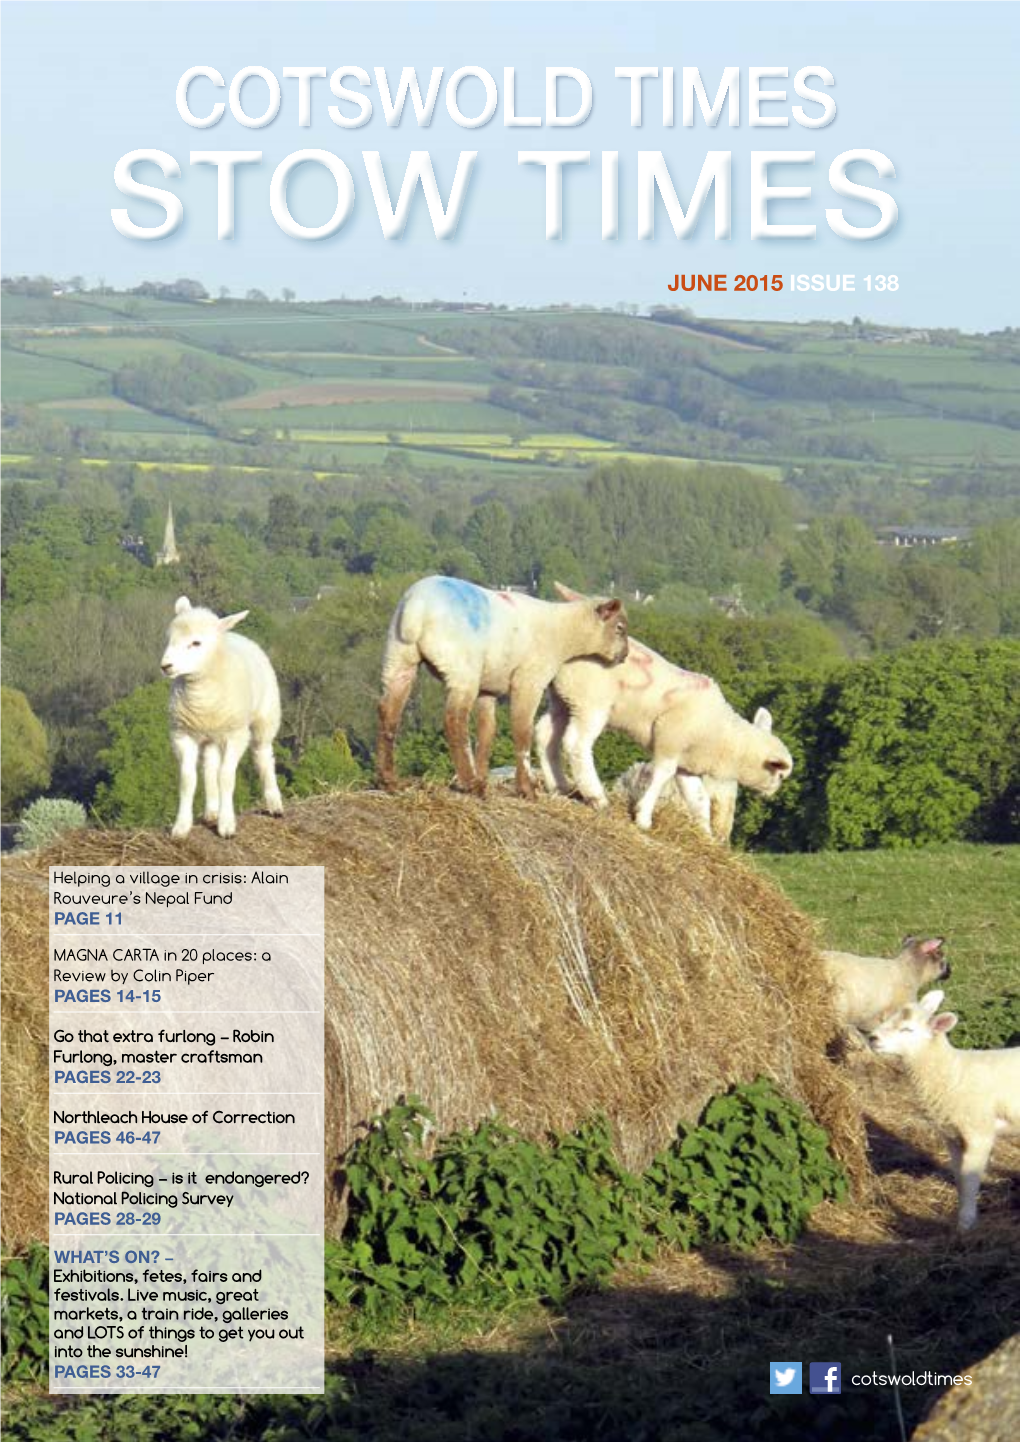 Cotswold Times Stow Times June 2015 Issue 138